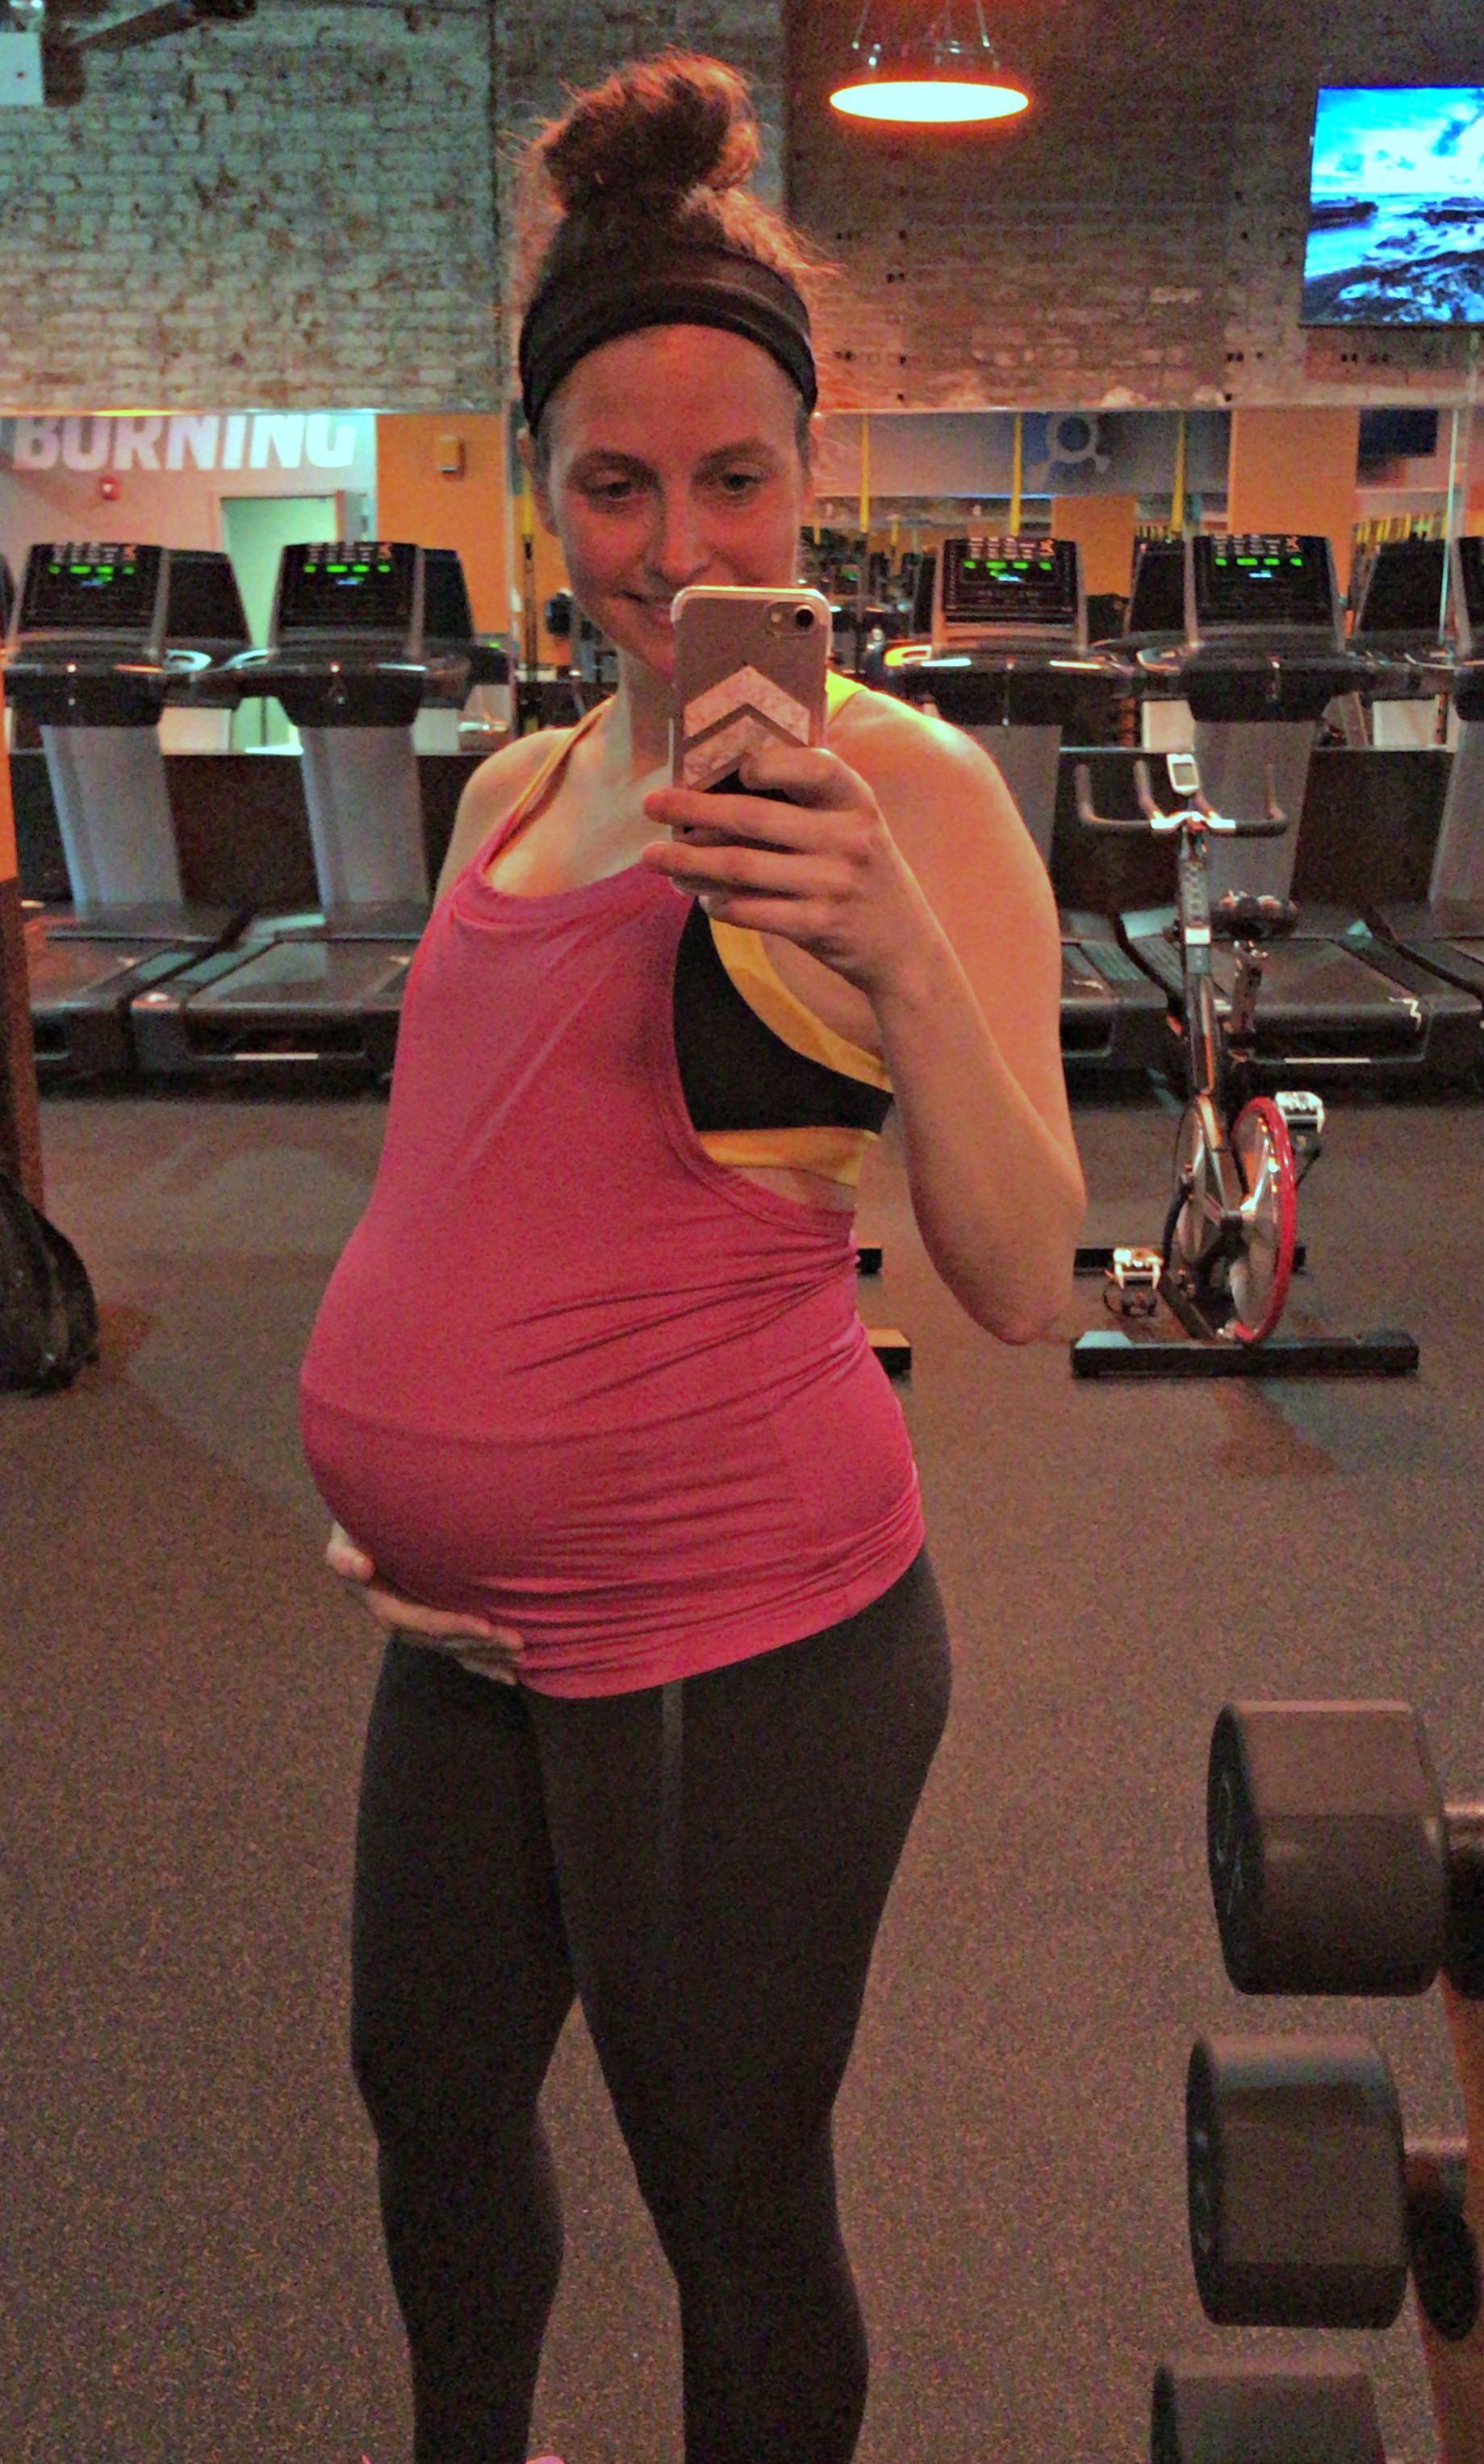 heather working out at orangethoery 36 weeks